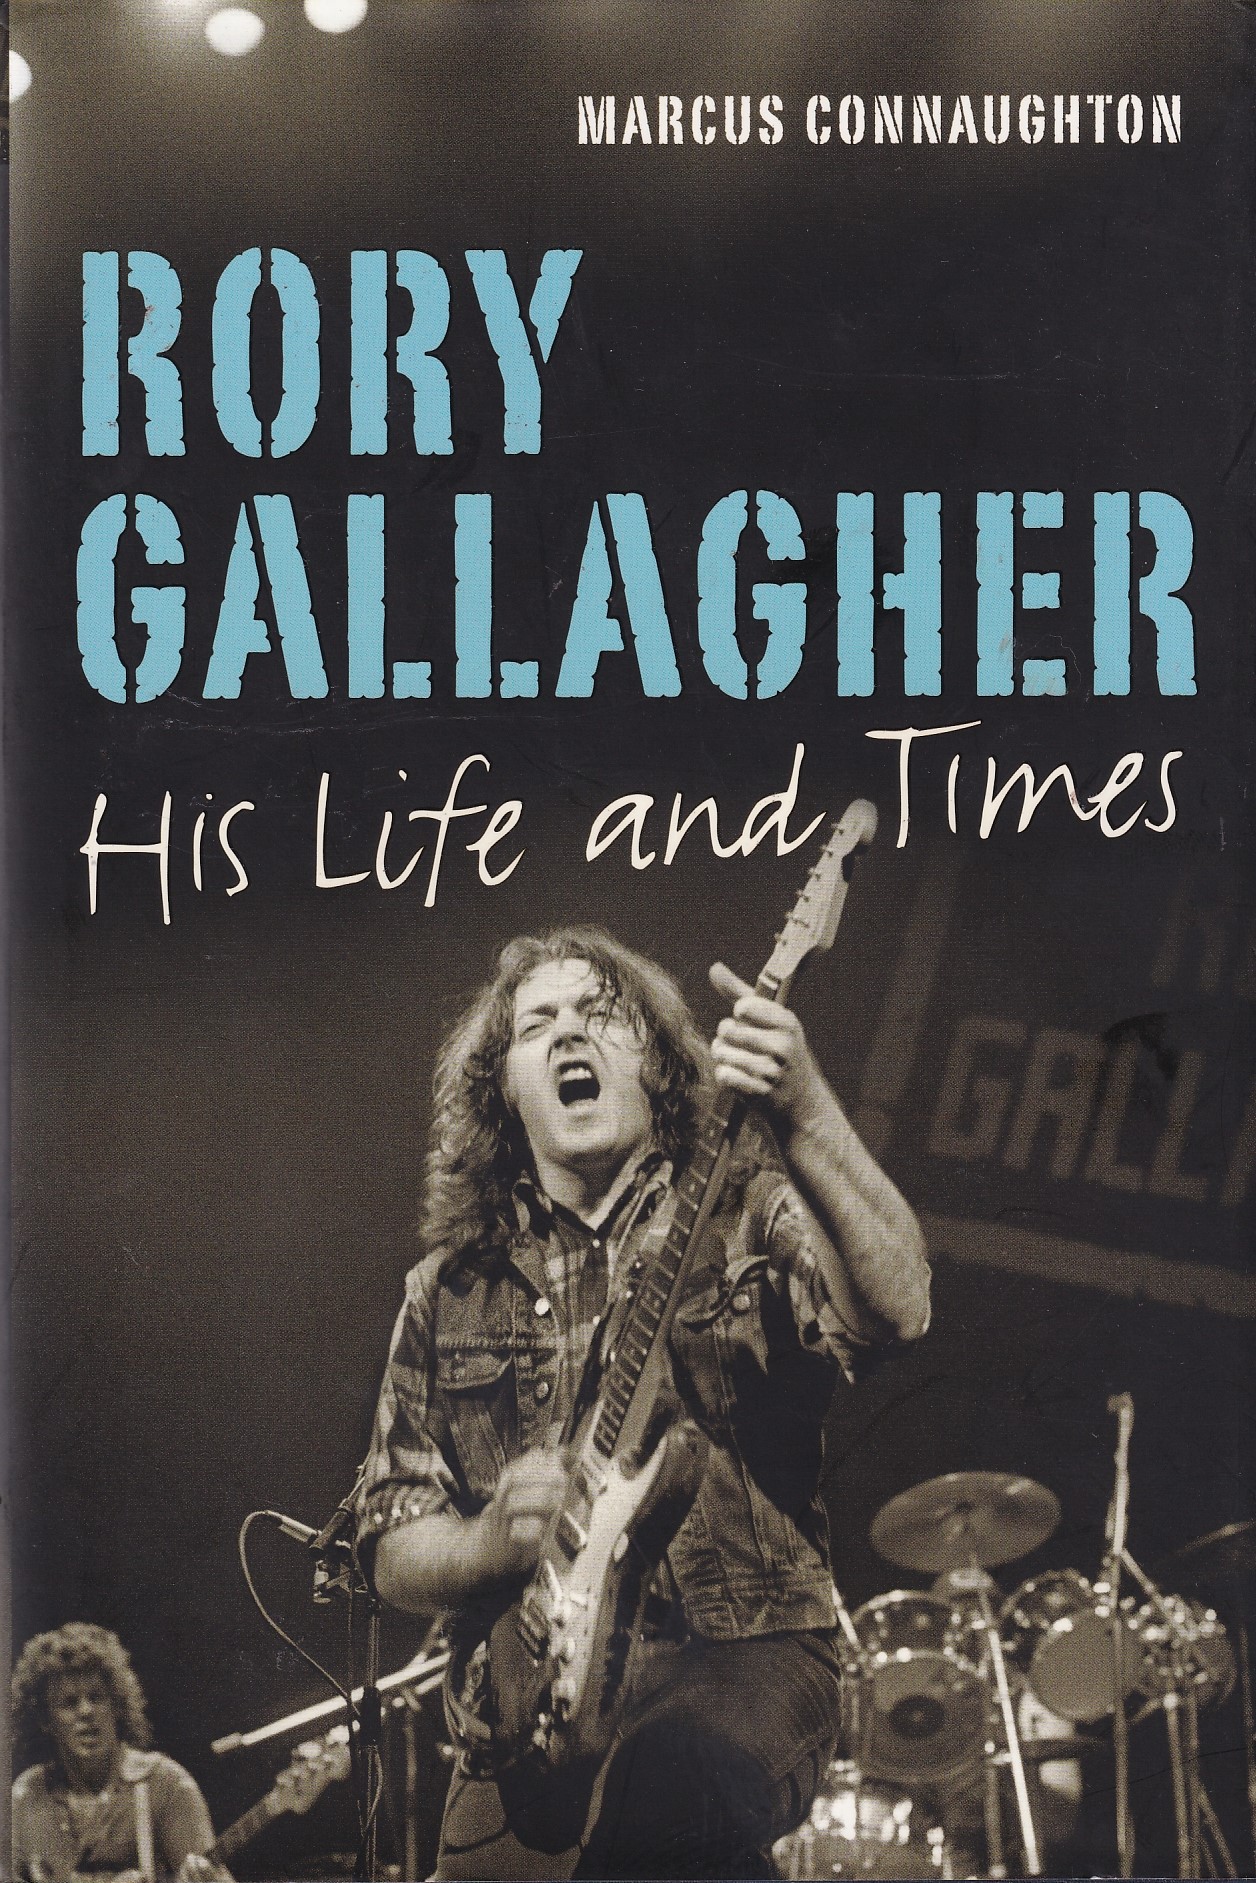 Rory Gallagher: His Life and Times by Marcus Connaughton